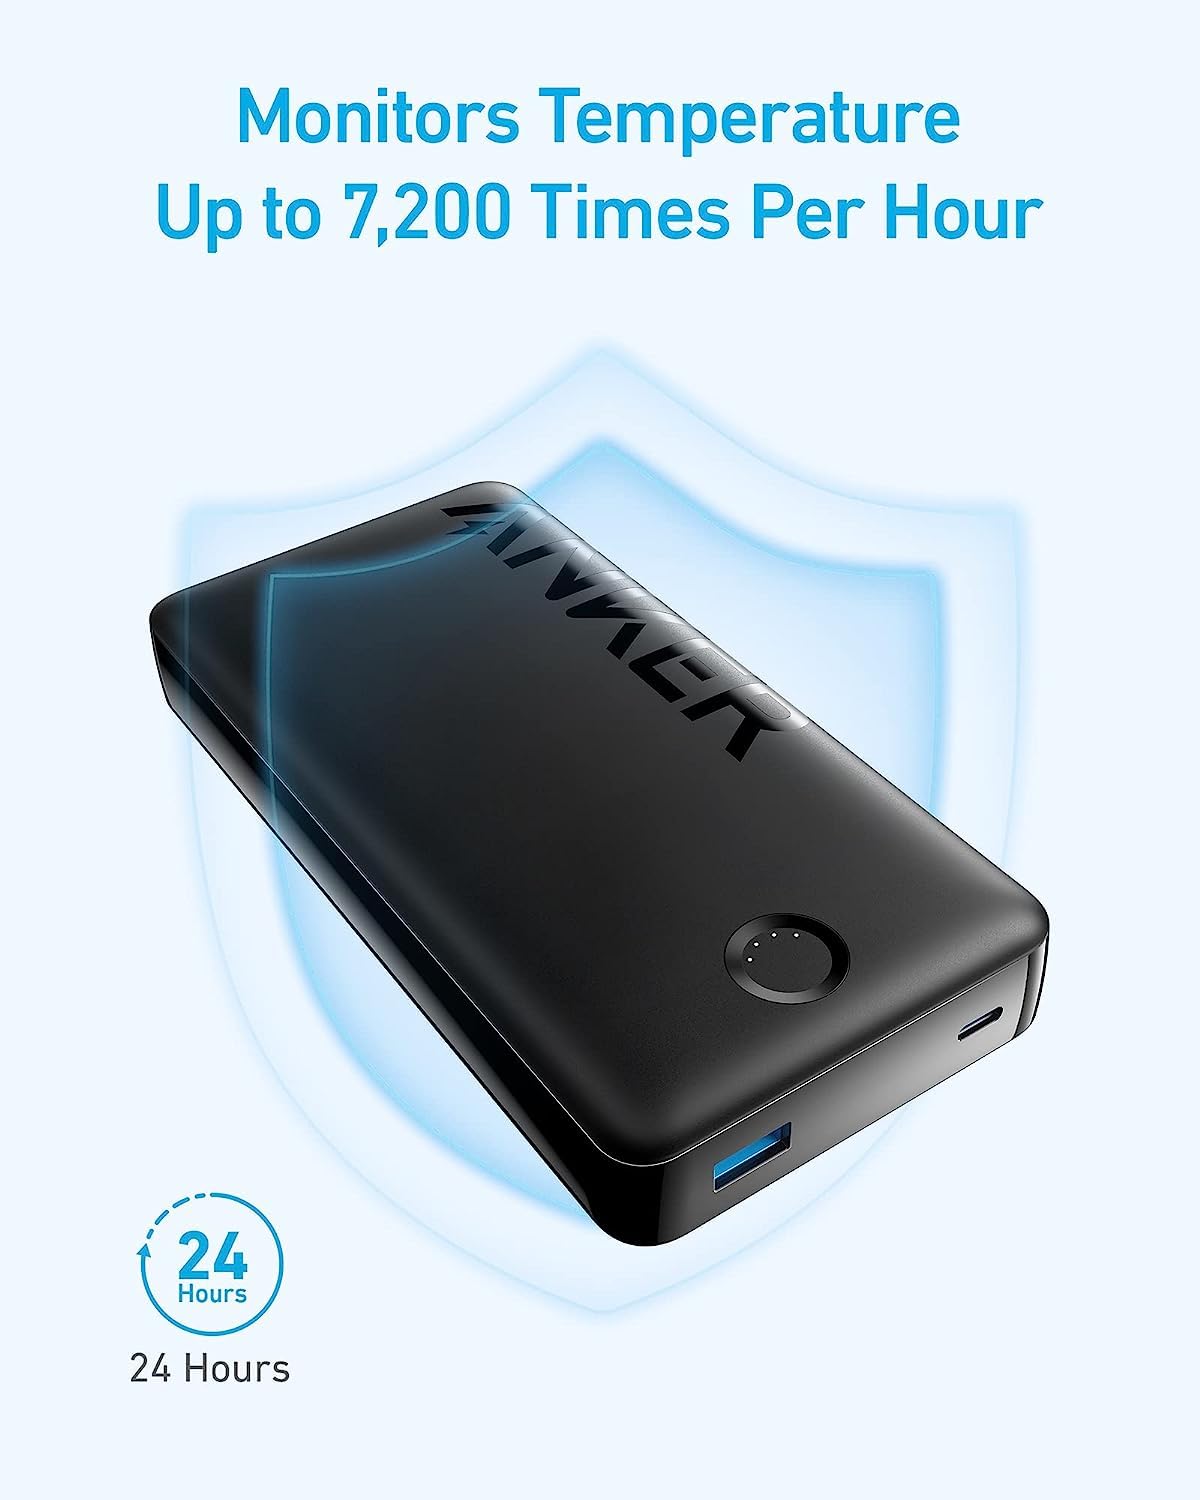 Anker 20K Power Bank with 2-Port